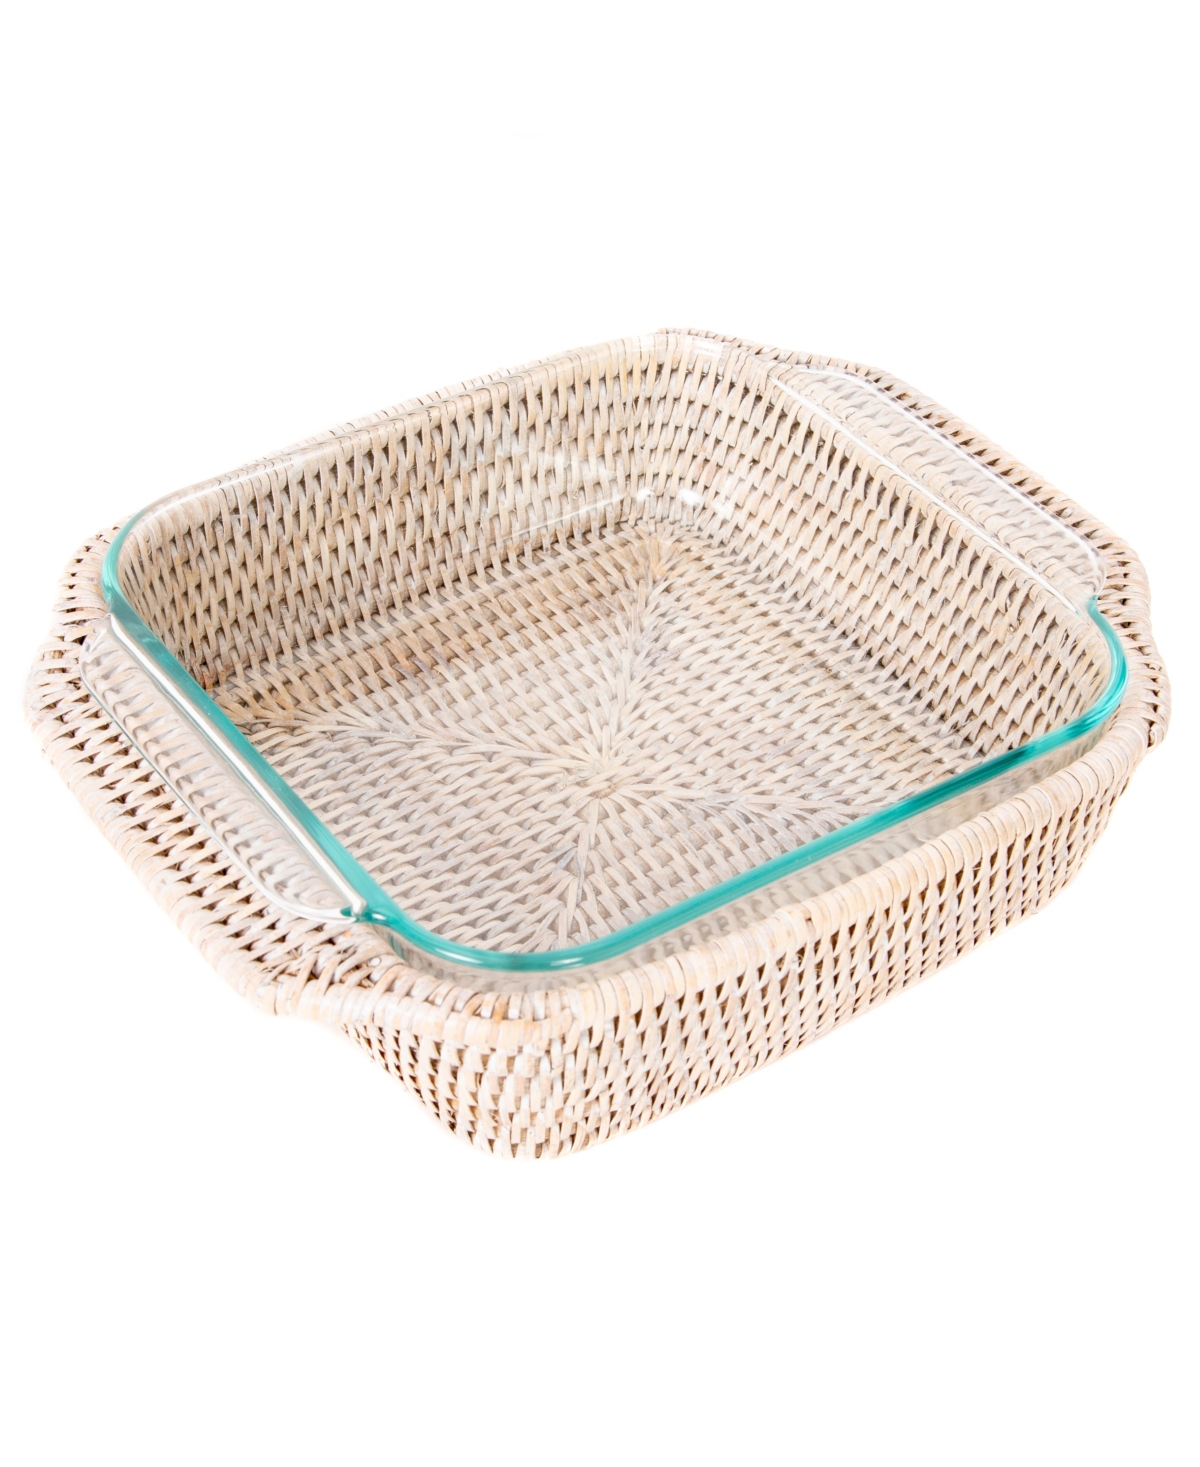 Shop Artifacts Trading Company Artifacts Rattan Square Baker Basket With Pyrex In Off-white